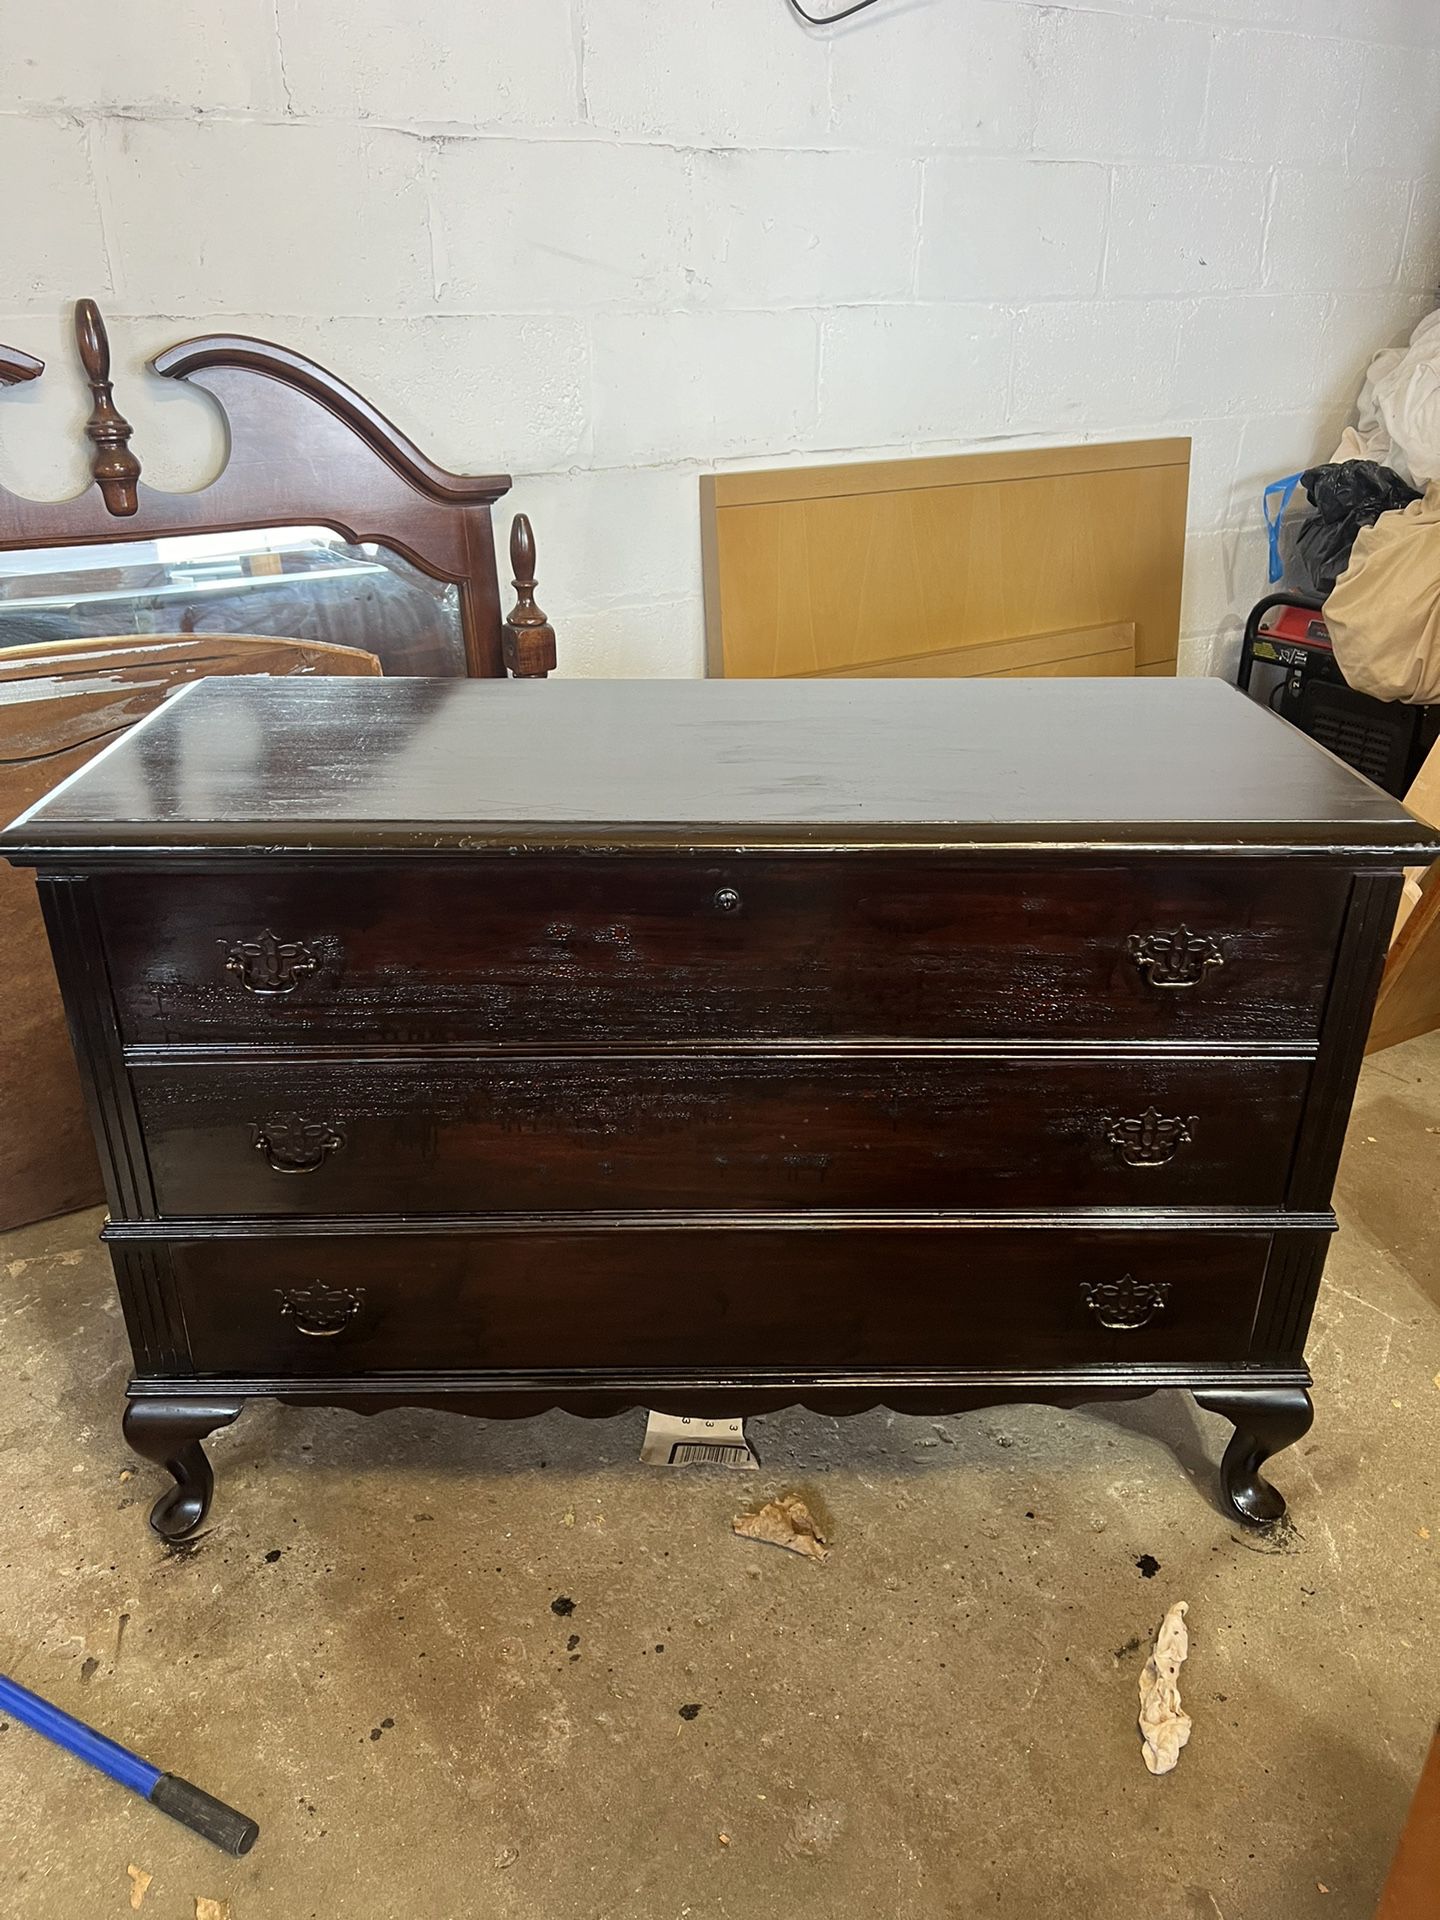 Nice vintage cedar hope chest with drawer and key